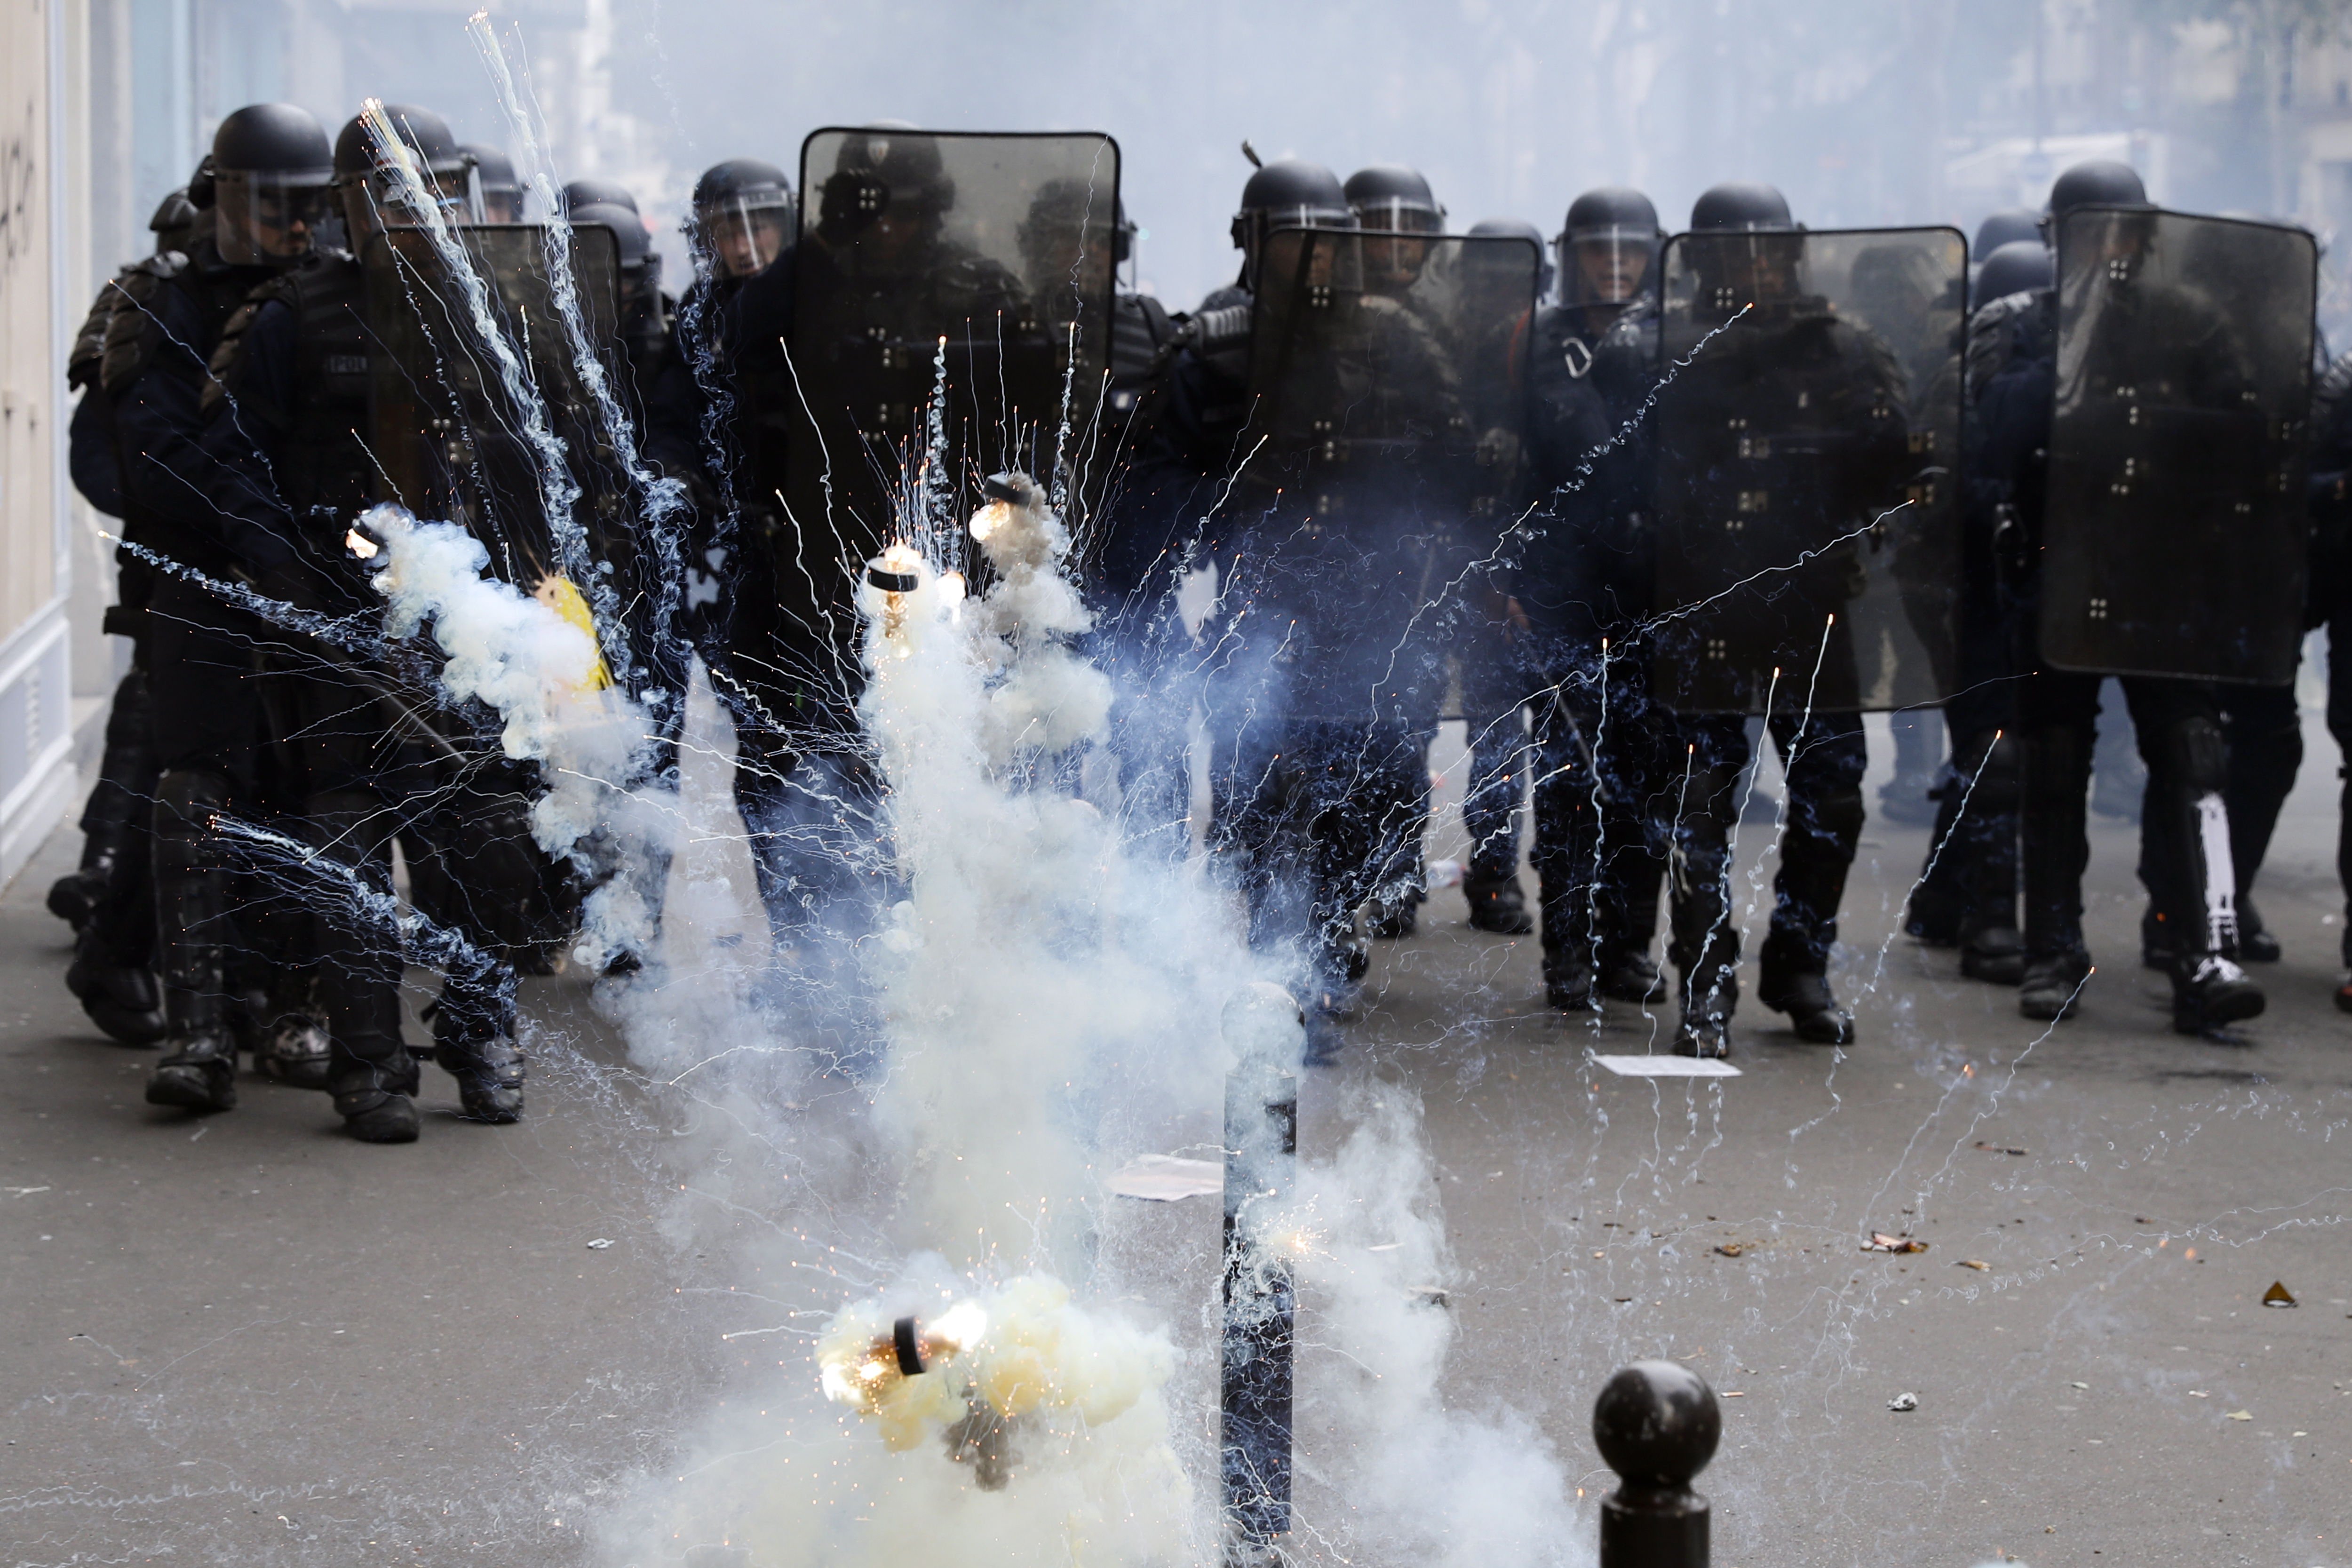 Paris (France), 26/05/2018.- Tear gas palest pucks explode in front of French riot police officers during clashes with a group of protesters as thousands of people demonstrate against French government reforms in Paris, France, 26 May 2018. Far left political parties and French trade union CGT (General Confederation of Labour) call for a national day of protest against the government policies. (Protestas, Francia, Estados Unidos) EFE/EPA/ETIENNE LAURENT